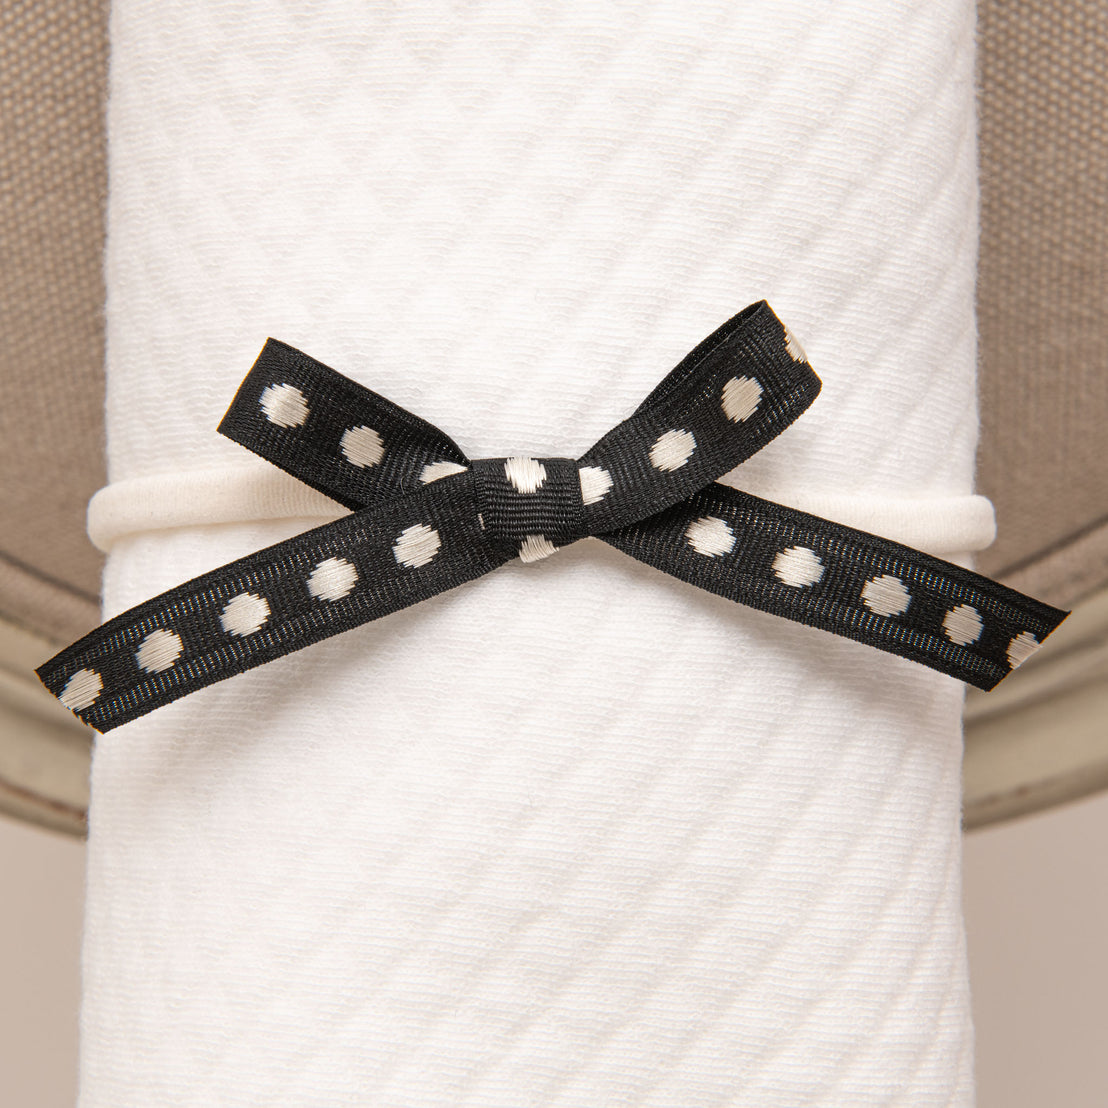 A white, textured blanket is tied with a June Bow Headband featuring small white polka dots, creating a stylish bow at the center. The background is neutral beige.